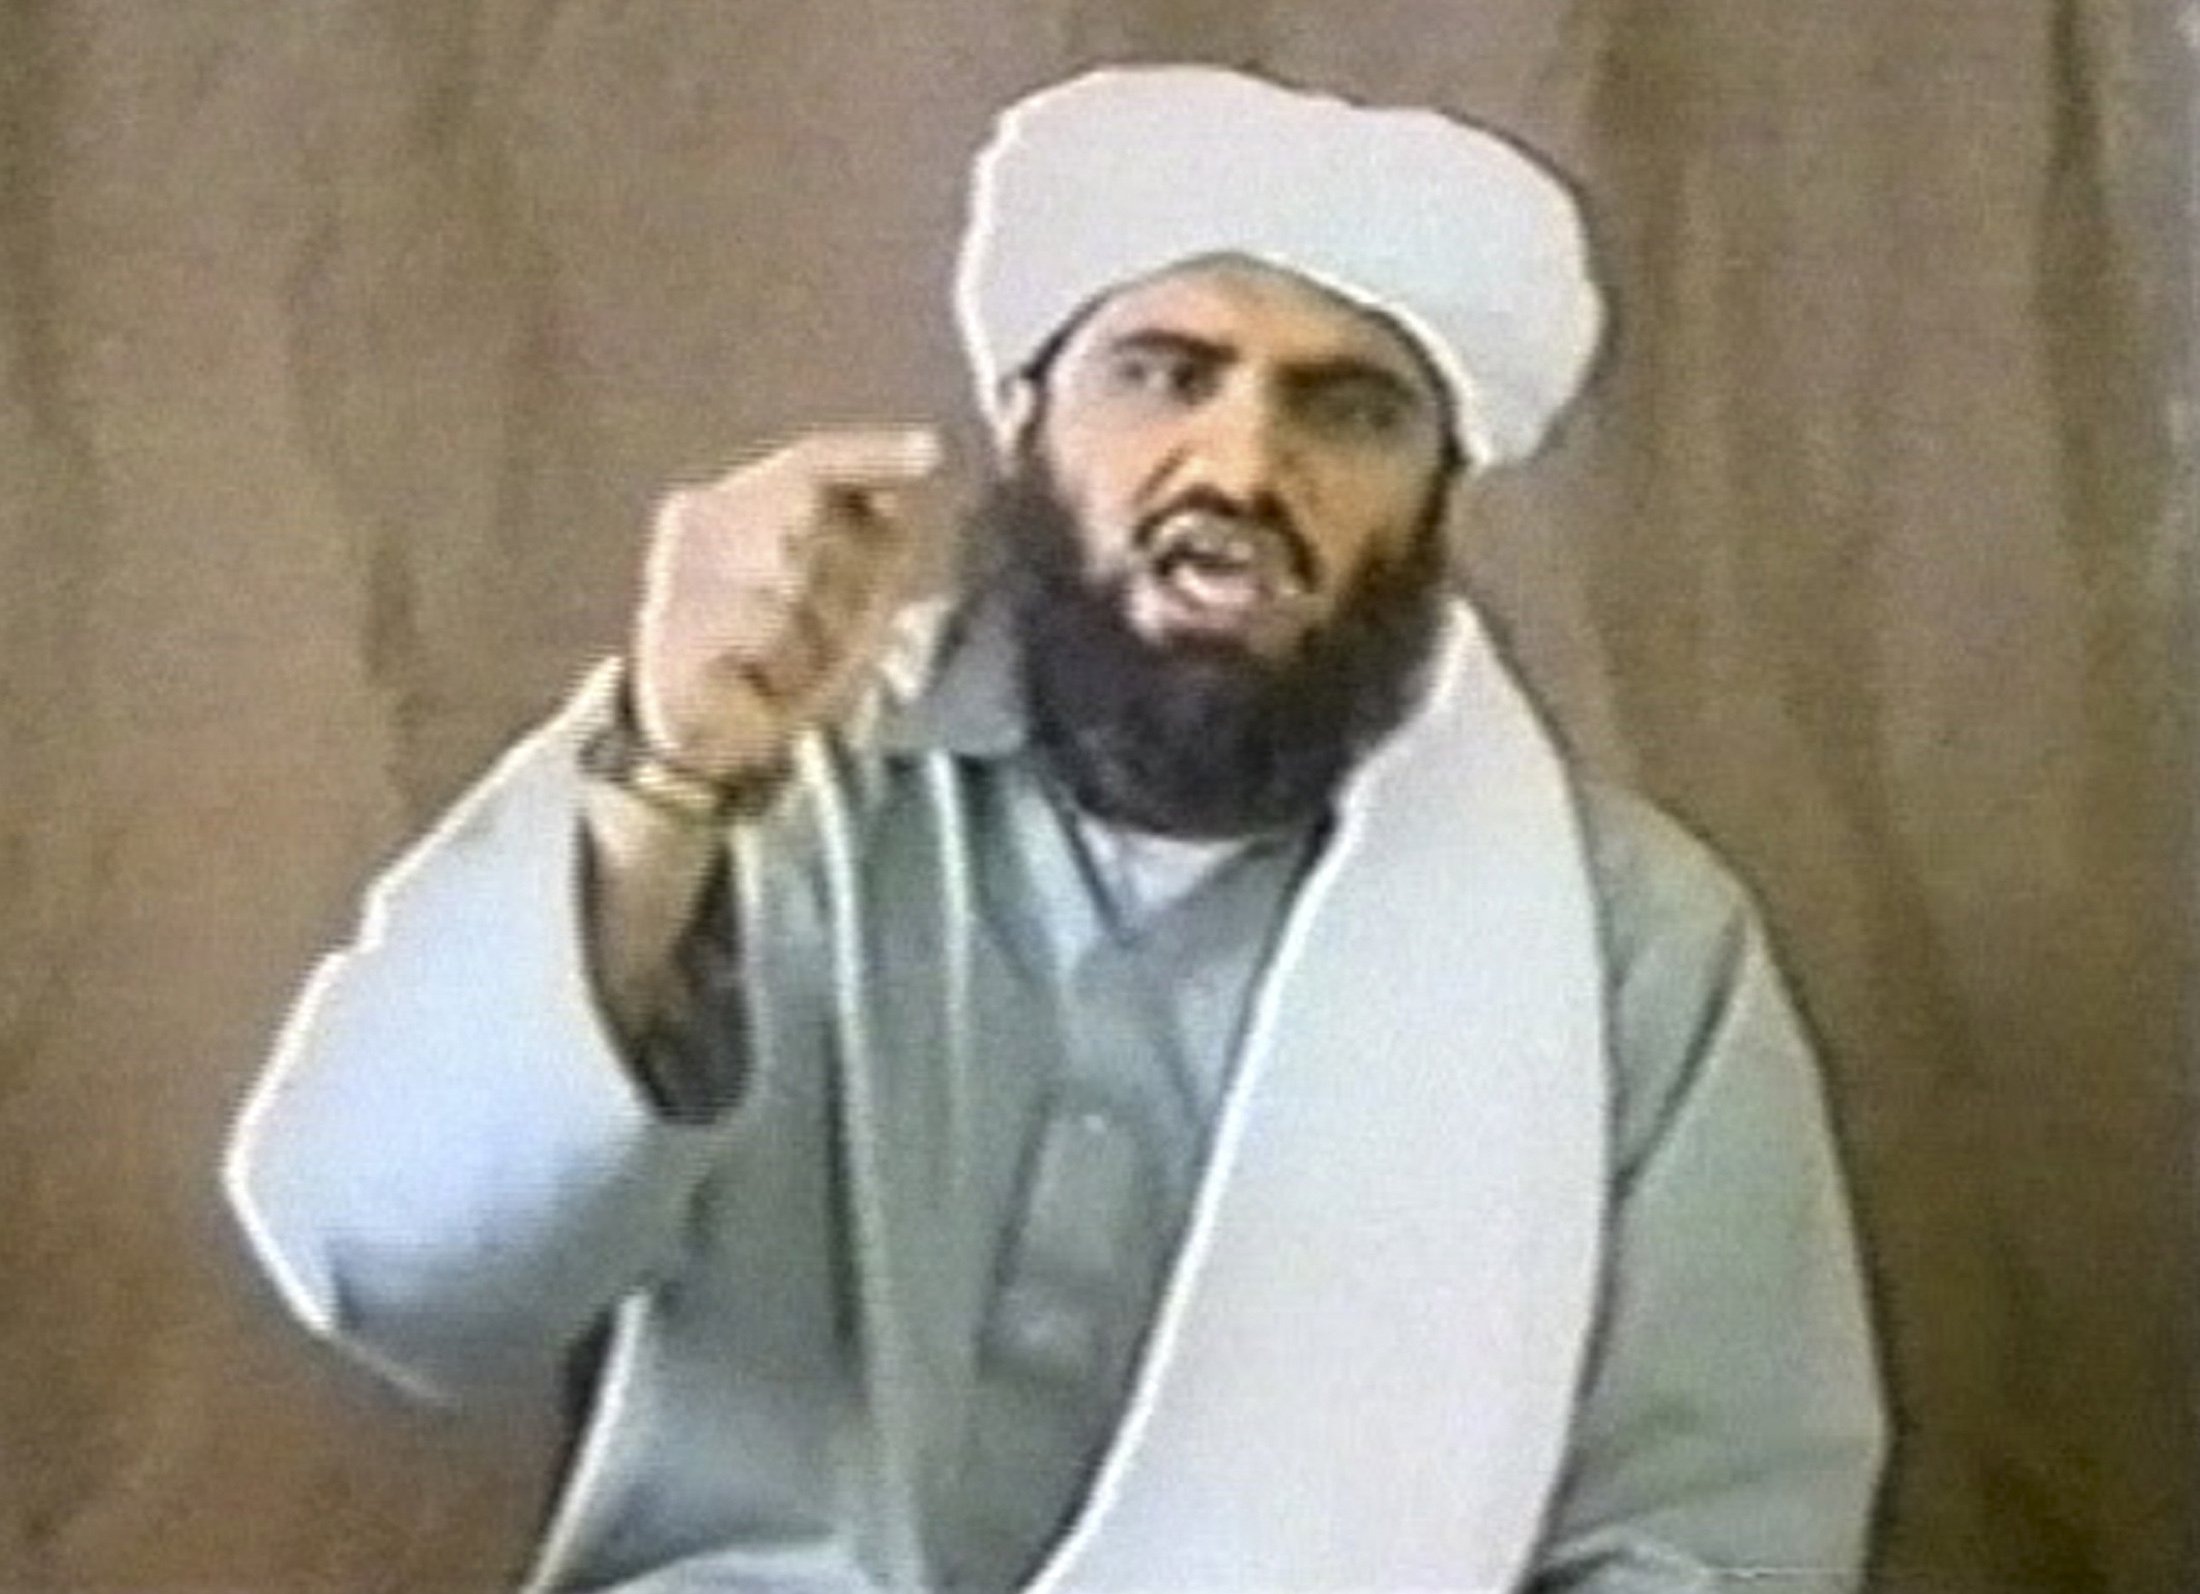 A man identified as Sulaiman Abu Ghaith appears in this still image taken from an undated video address. (Reuters)